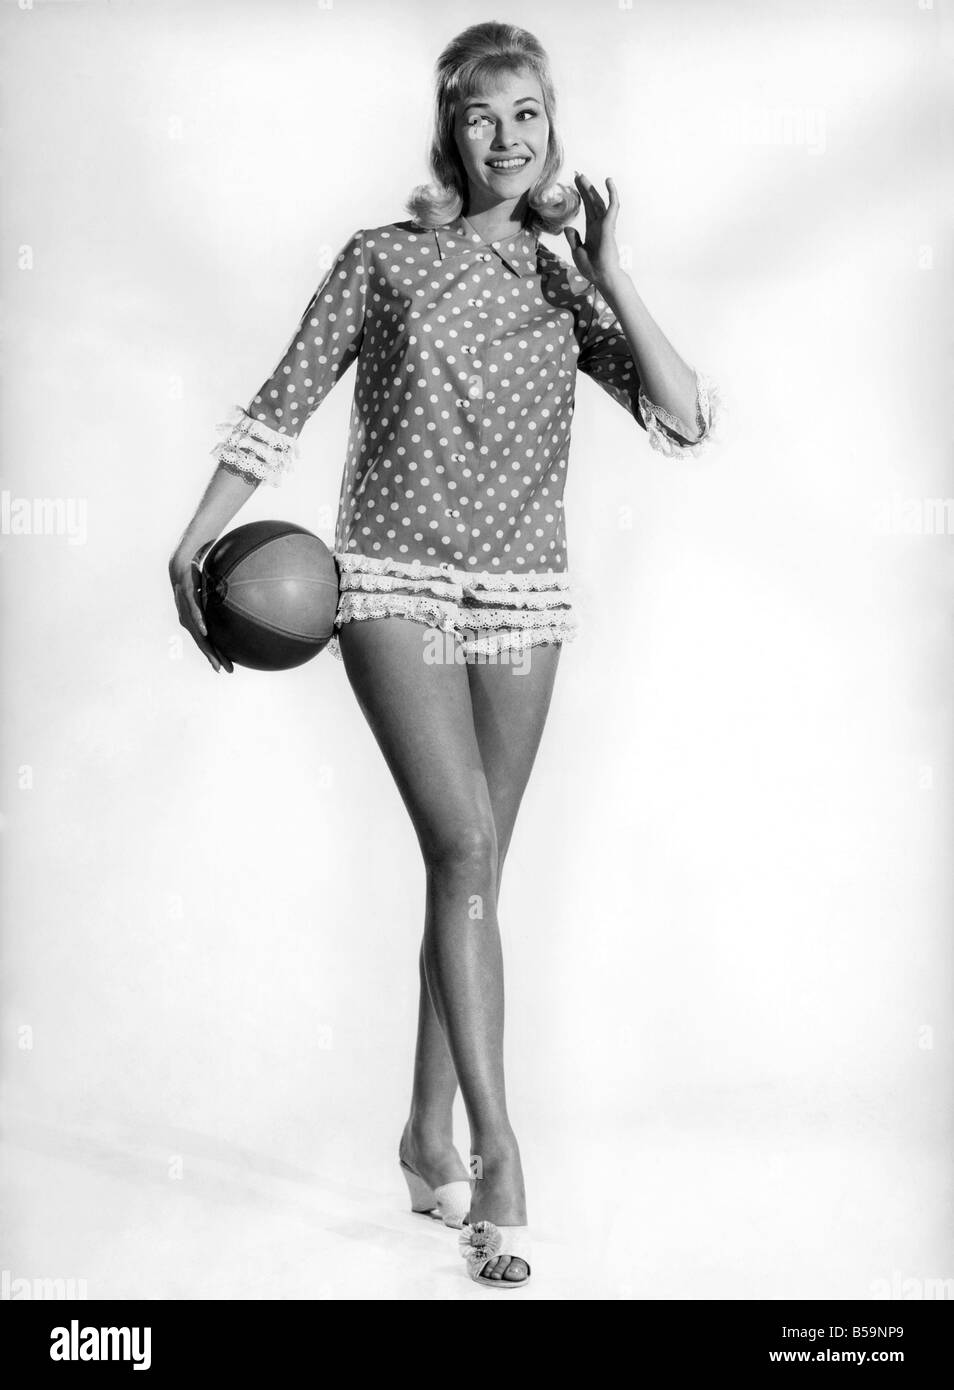 Model Jo Waring wearing a polka dot patterned top and holding a beach ...